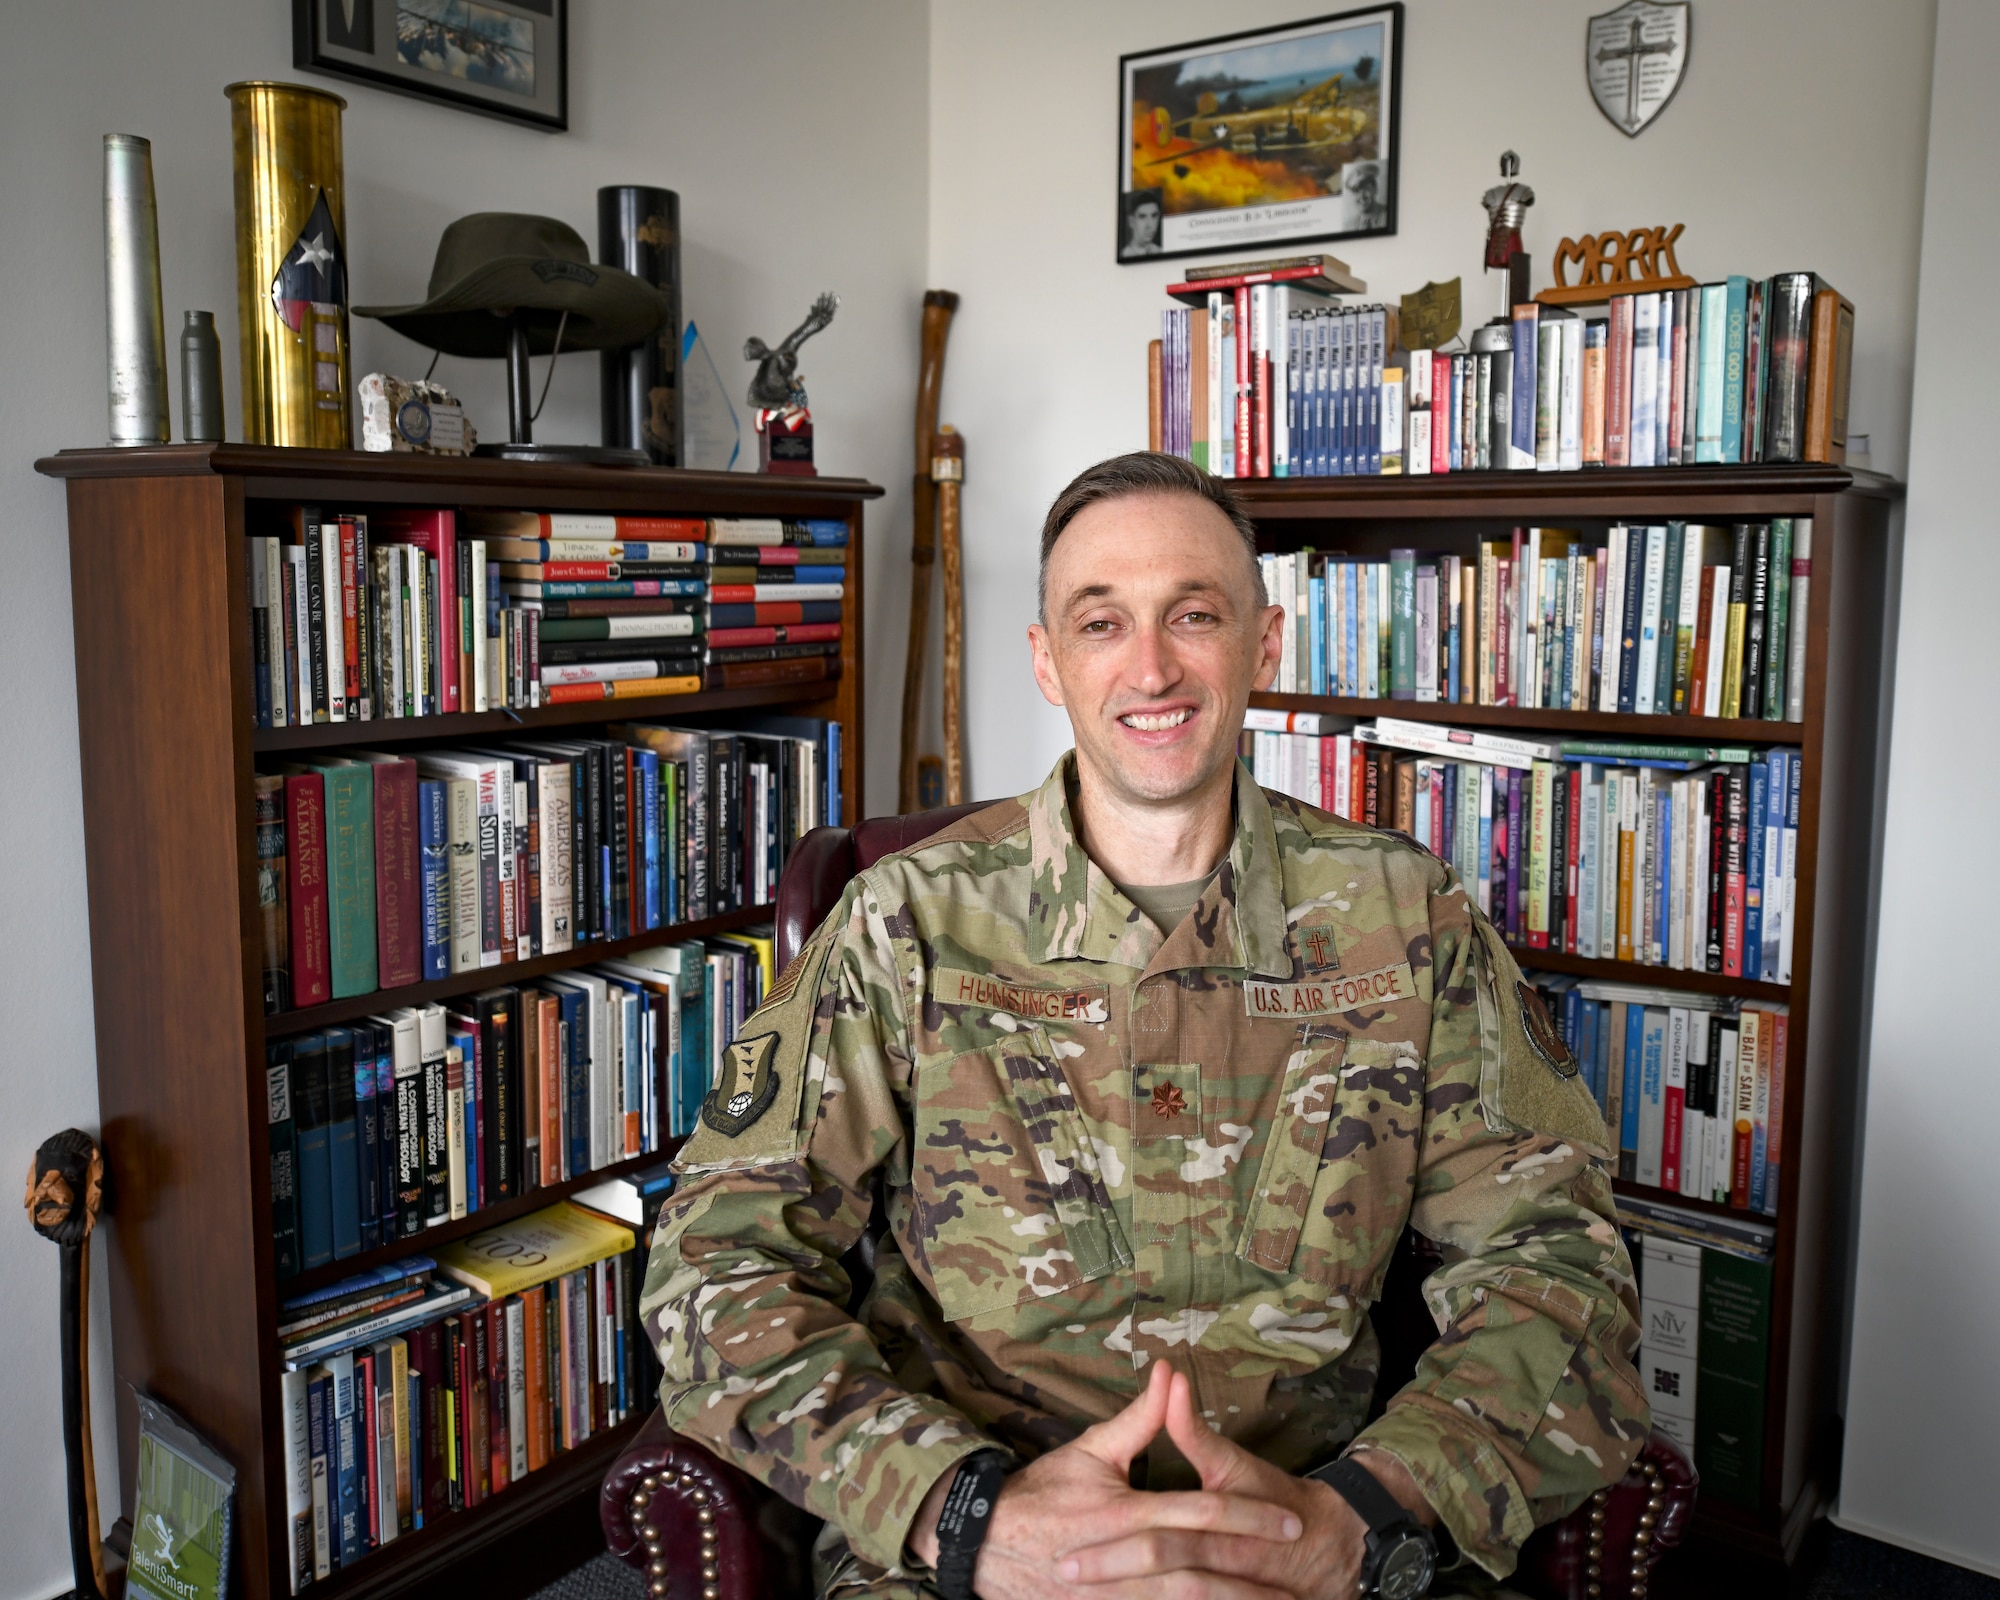 U.S. Air Force Chaplain (Maj.) Mark Hunsinger, 435th Air Expeditionary Wing and 435th Air Ground Operations Wing chaplain, smiles for a photo after earning the 2019 Military Chaplains Association Distinguished Service Award at Ramstein Air Base, Germany, June 30, 2020. The award is presented to one chaplain from each branch of service every year for exemplifying the highest standards of the military and the Chaplain Corps. (U.S. Air Force photo by Airman 1st Class Madeline Herzog)